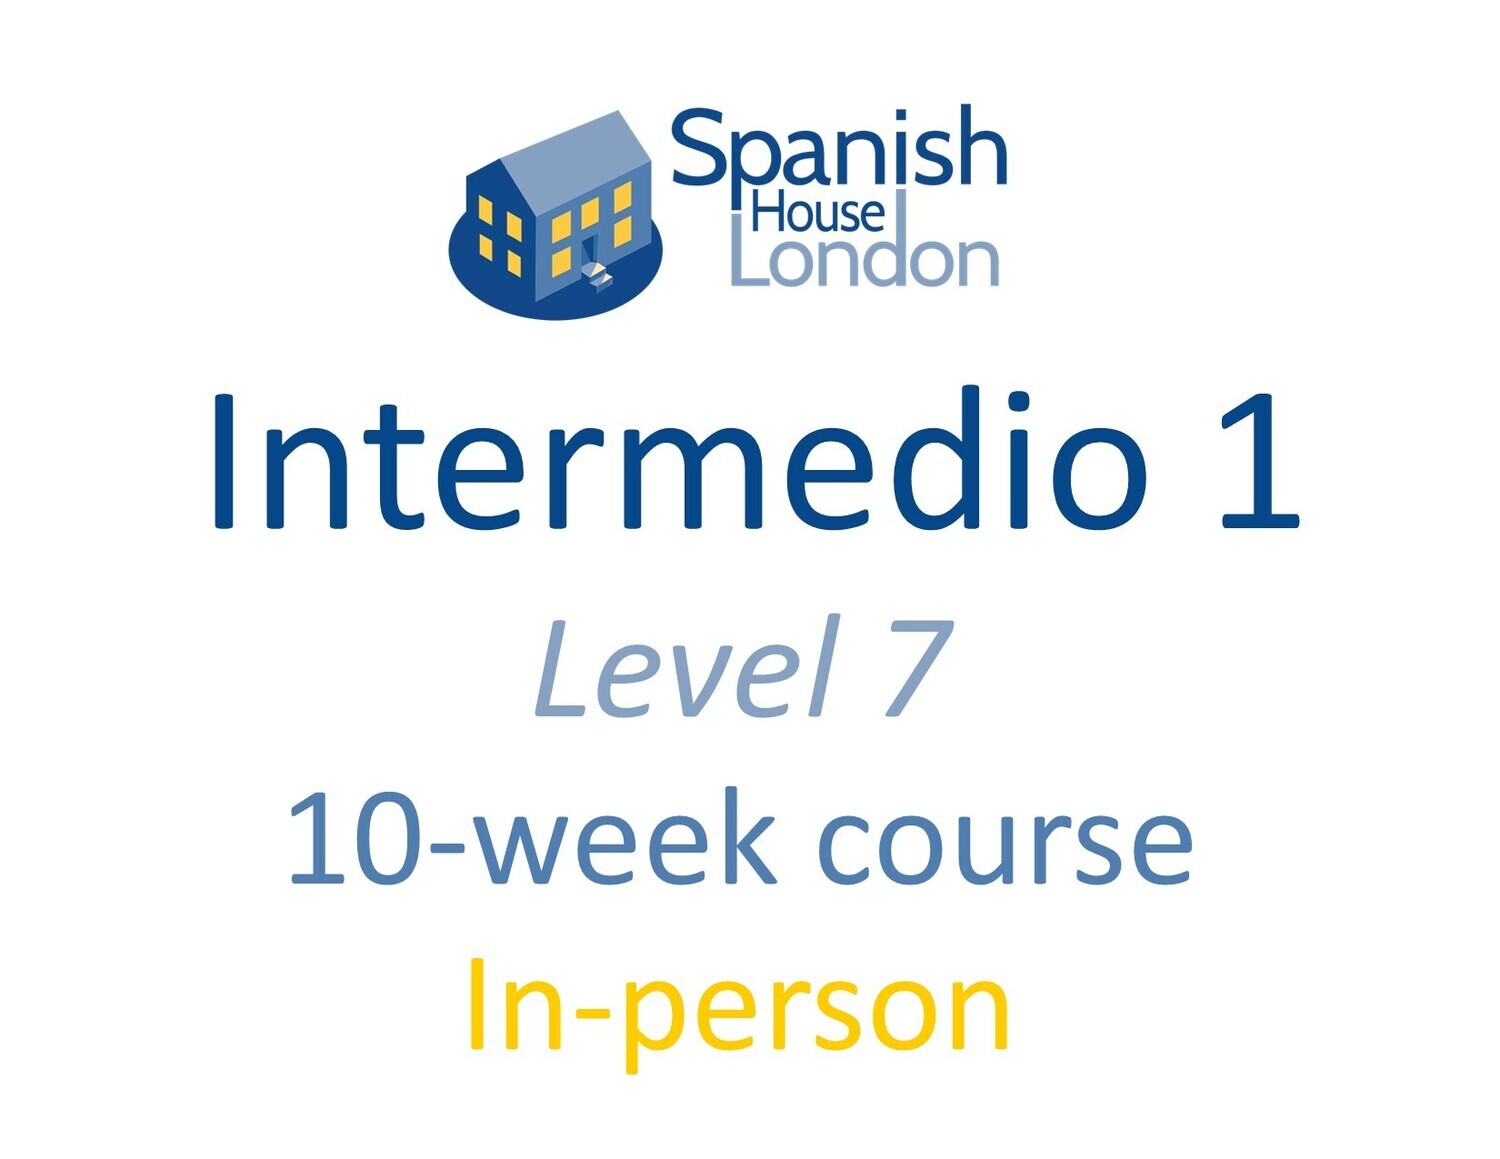 Intermedio 1 Course starting on 3rd July at 6pm in Clapham North